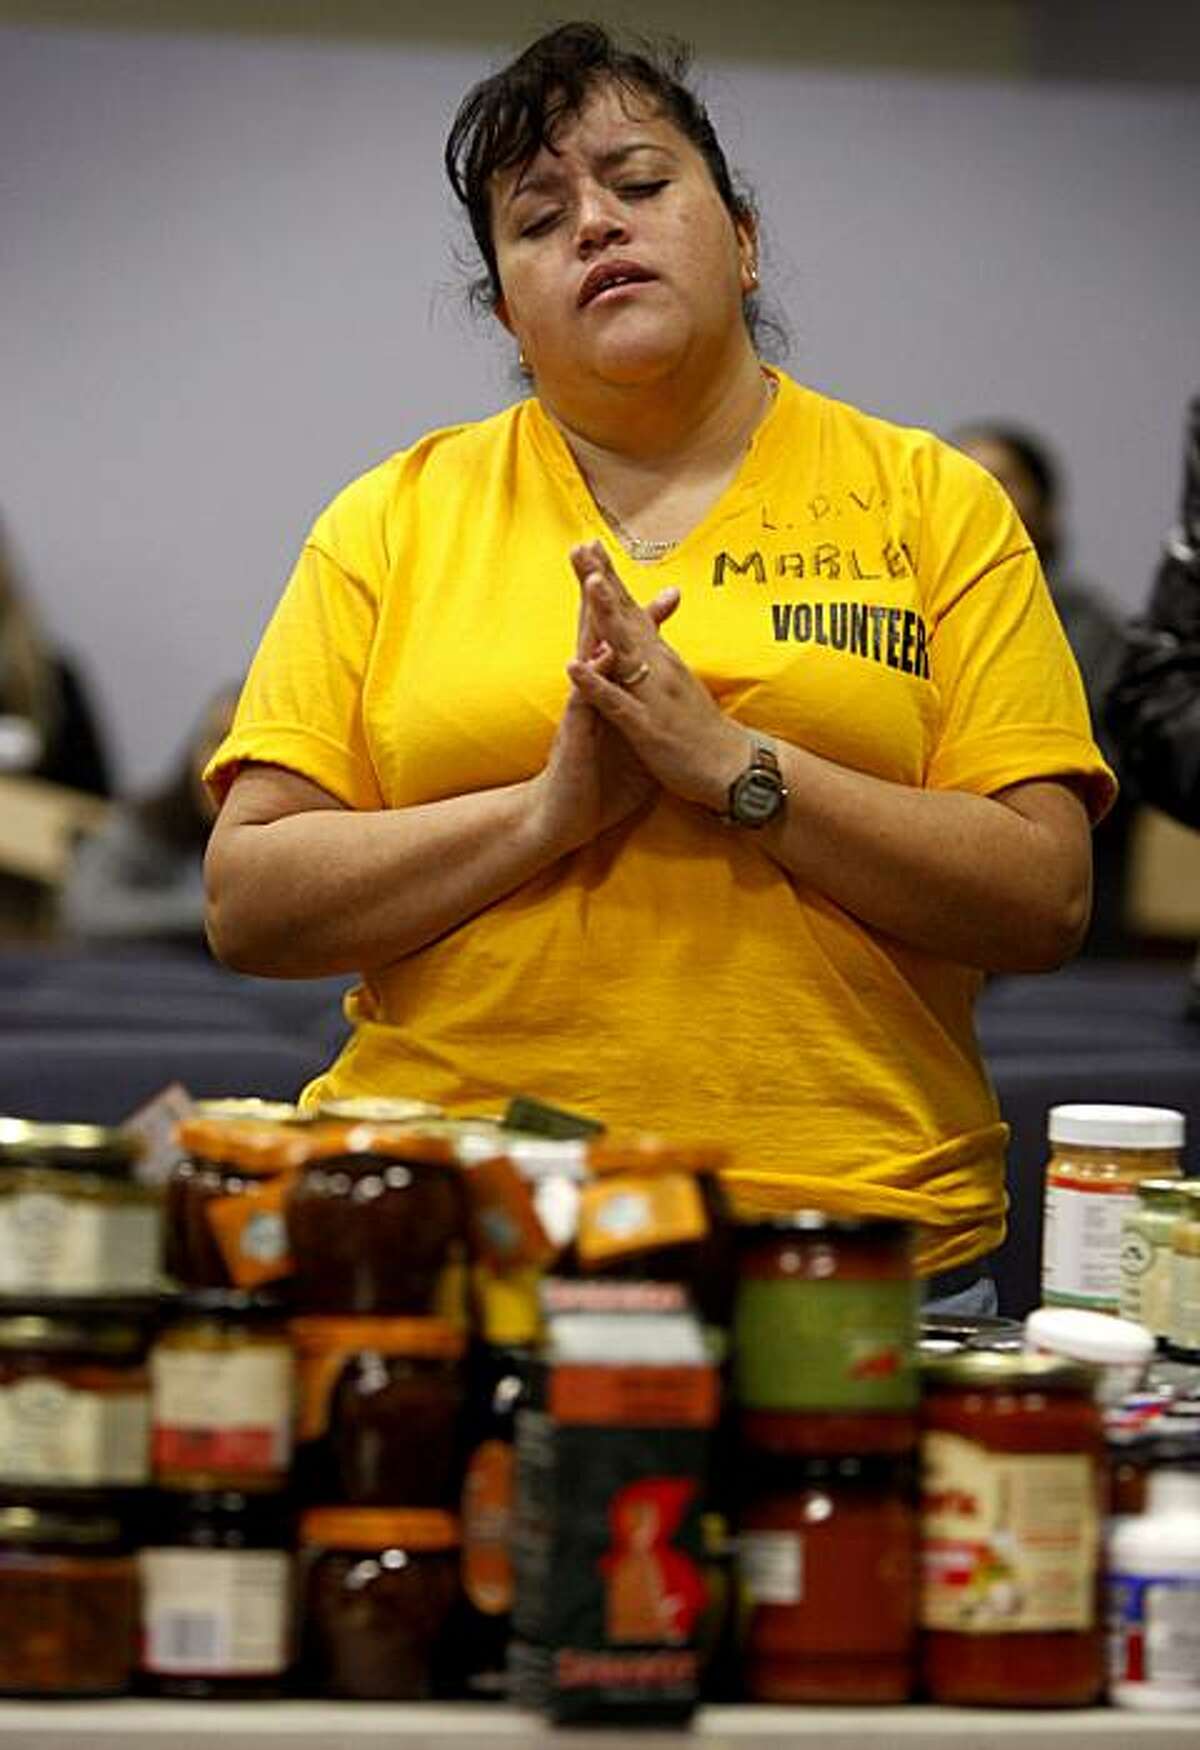 Volunteer Marlene Rojas prays before helping distribute free food to parishioners in Hayward, Calif., on Saturday, Jan. 23, 2010. The Bay Area Dream Center distributed as many as 5,000 bags of free groceries, donated by vendors from a fancy food trade show, to those who attended a 20-minute religious service.